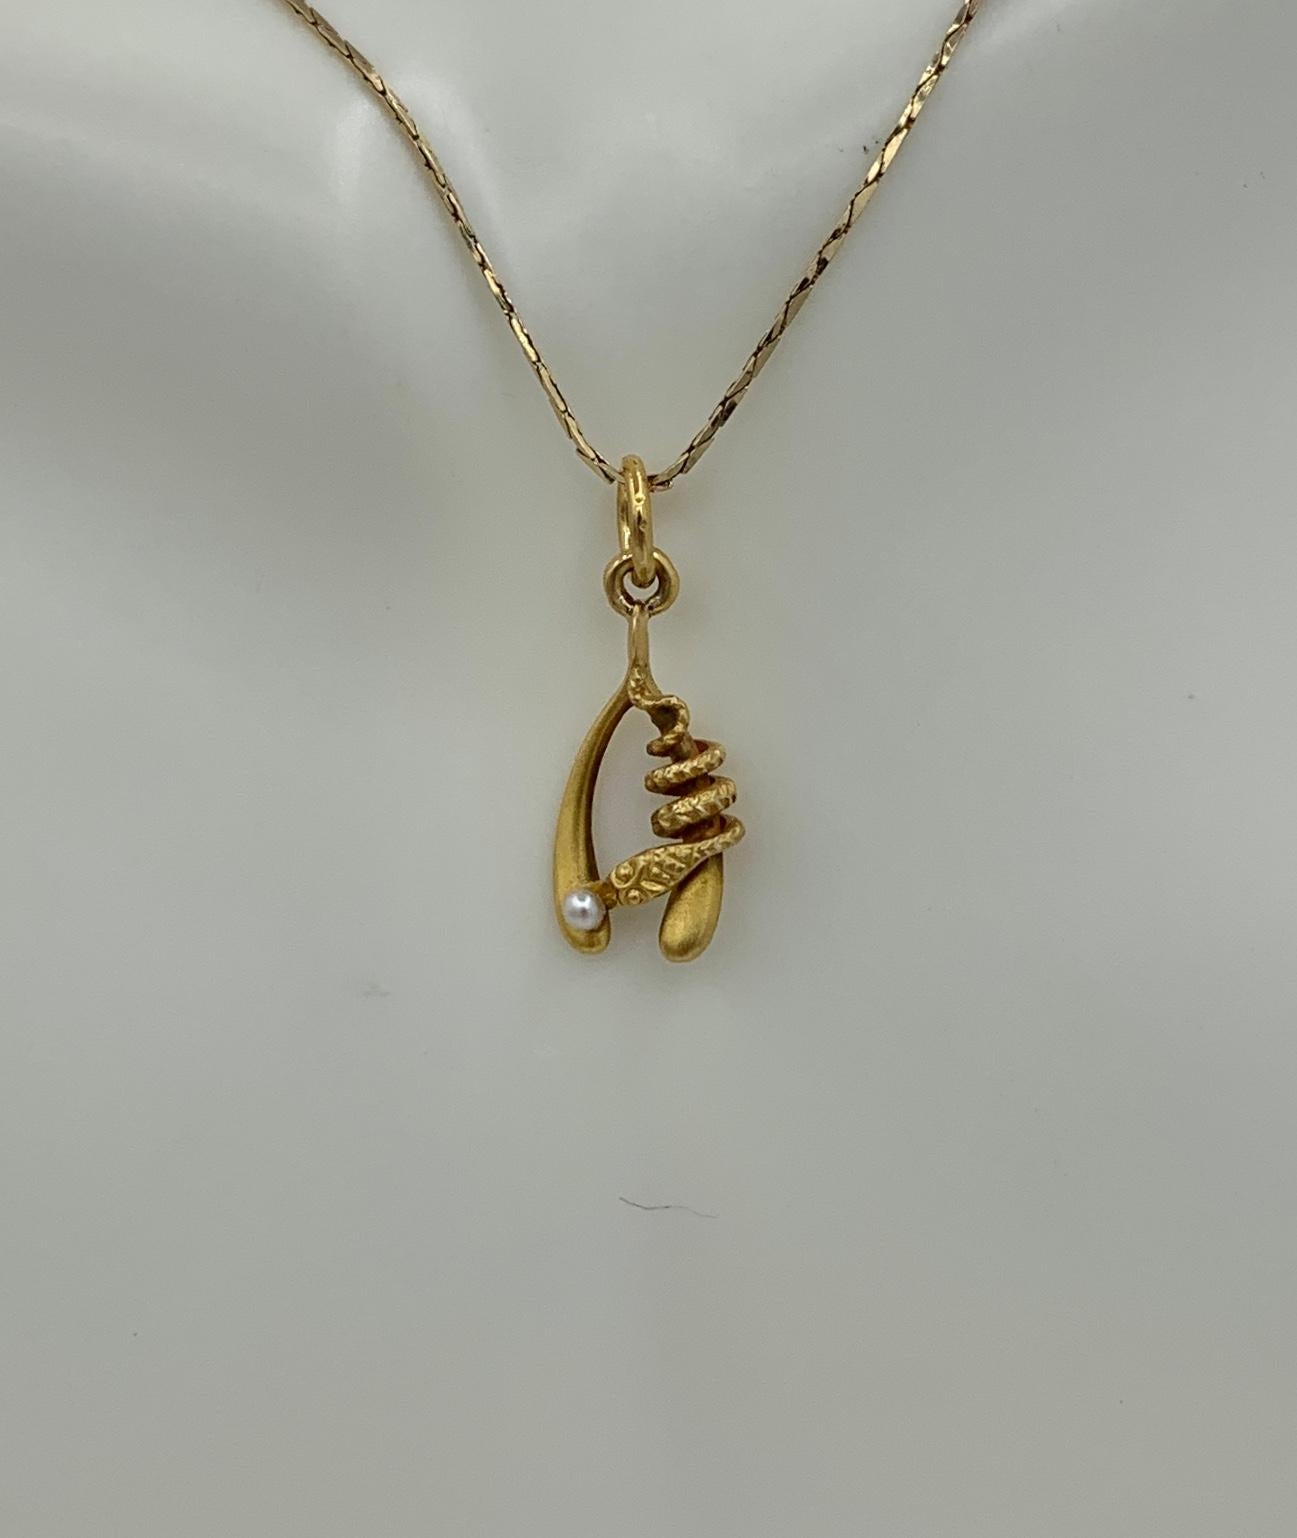 This is a very rare antique Victorian Snake Pendant Necklace depicting a snake or serpent wrapped around a Wishbone with a natural Pearl egg or globe.  The snake is beautifully created with stunning three dimensional design in 10 Karat yellow gold. 